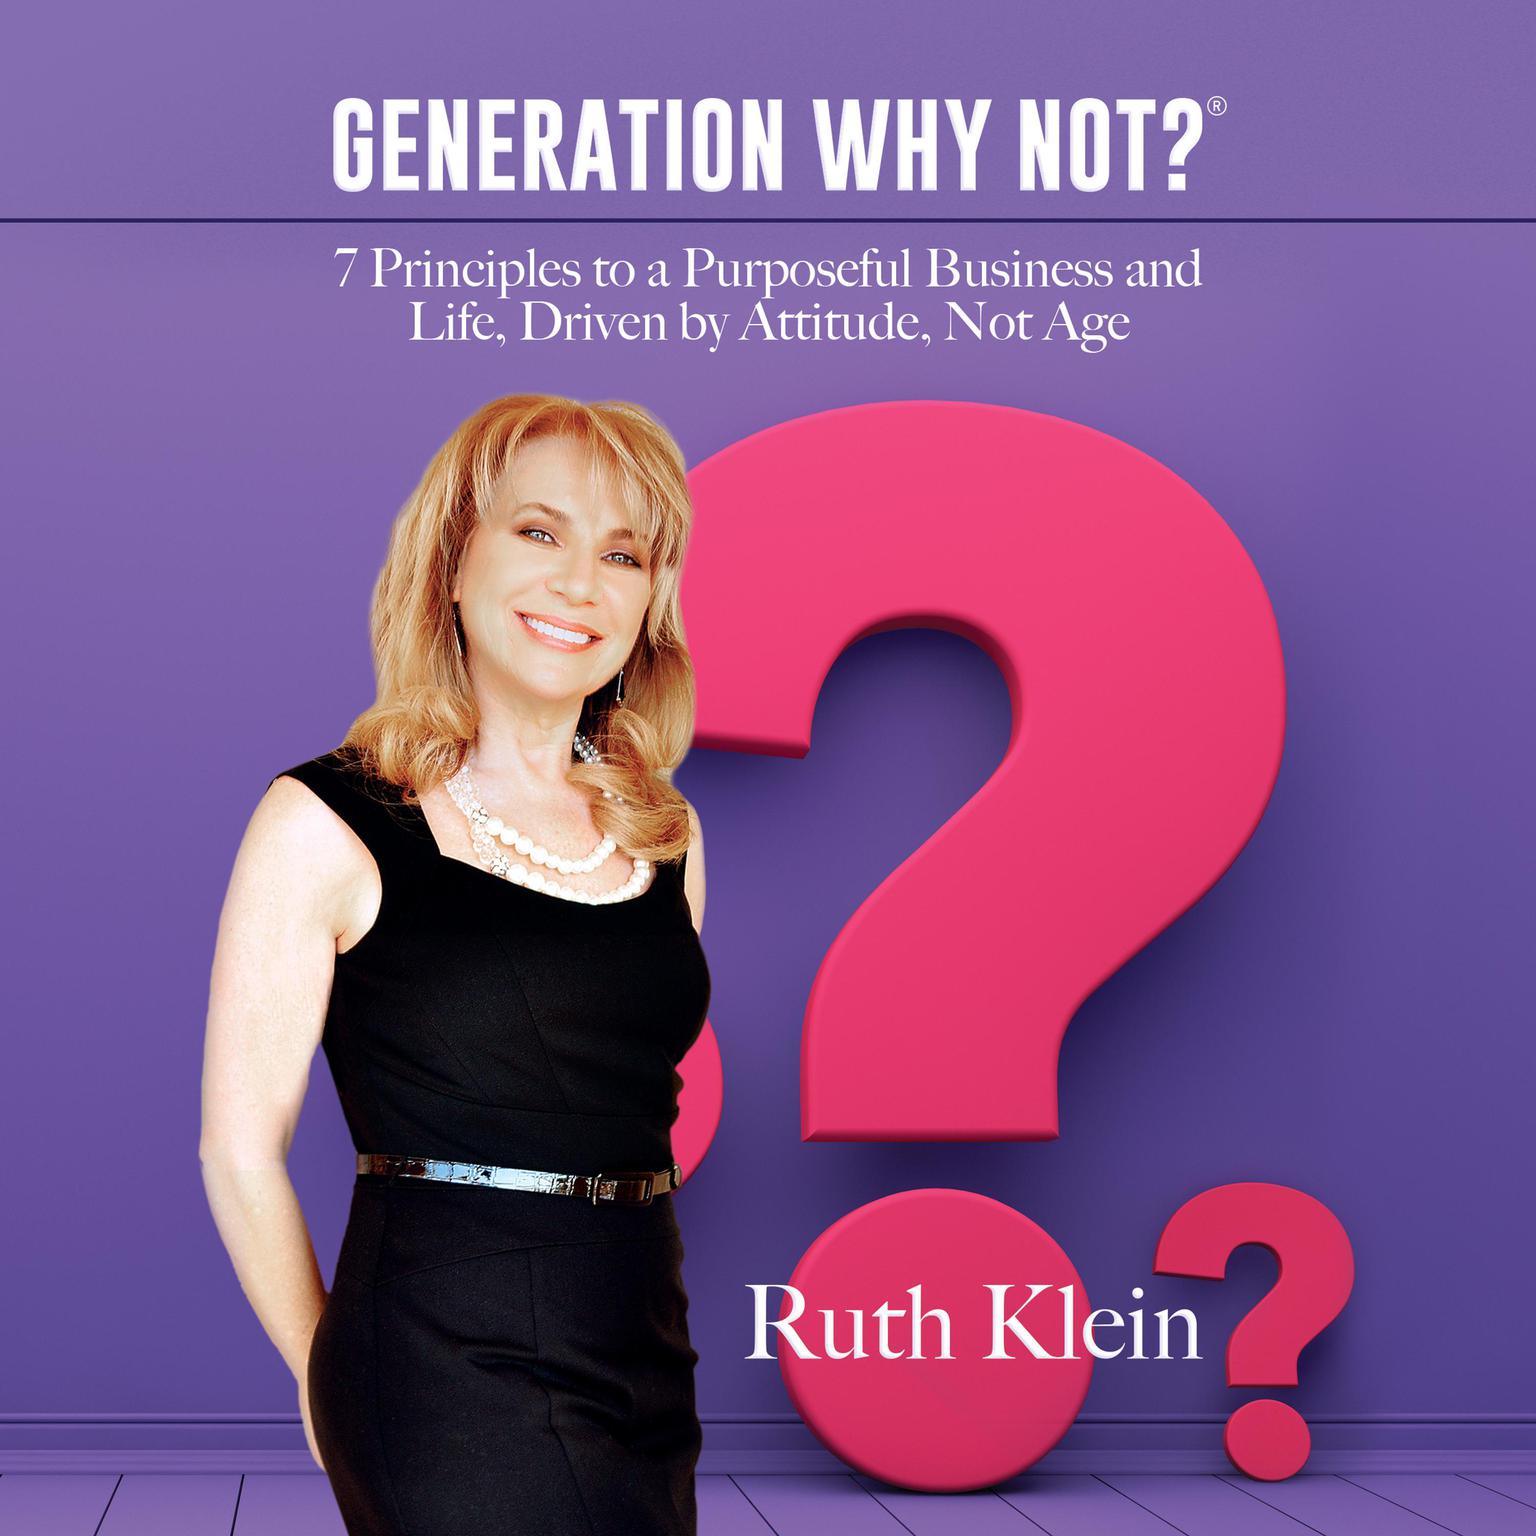 Generation Why Not?: 7 Principles to a Purposeful Business and Life, Driven by Attitude, Not Age Audiobook, by Ruth Klein